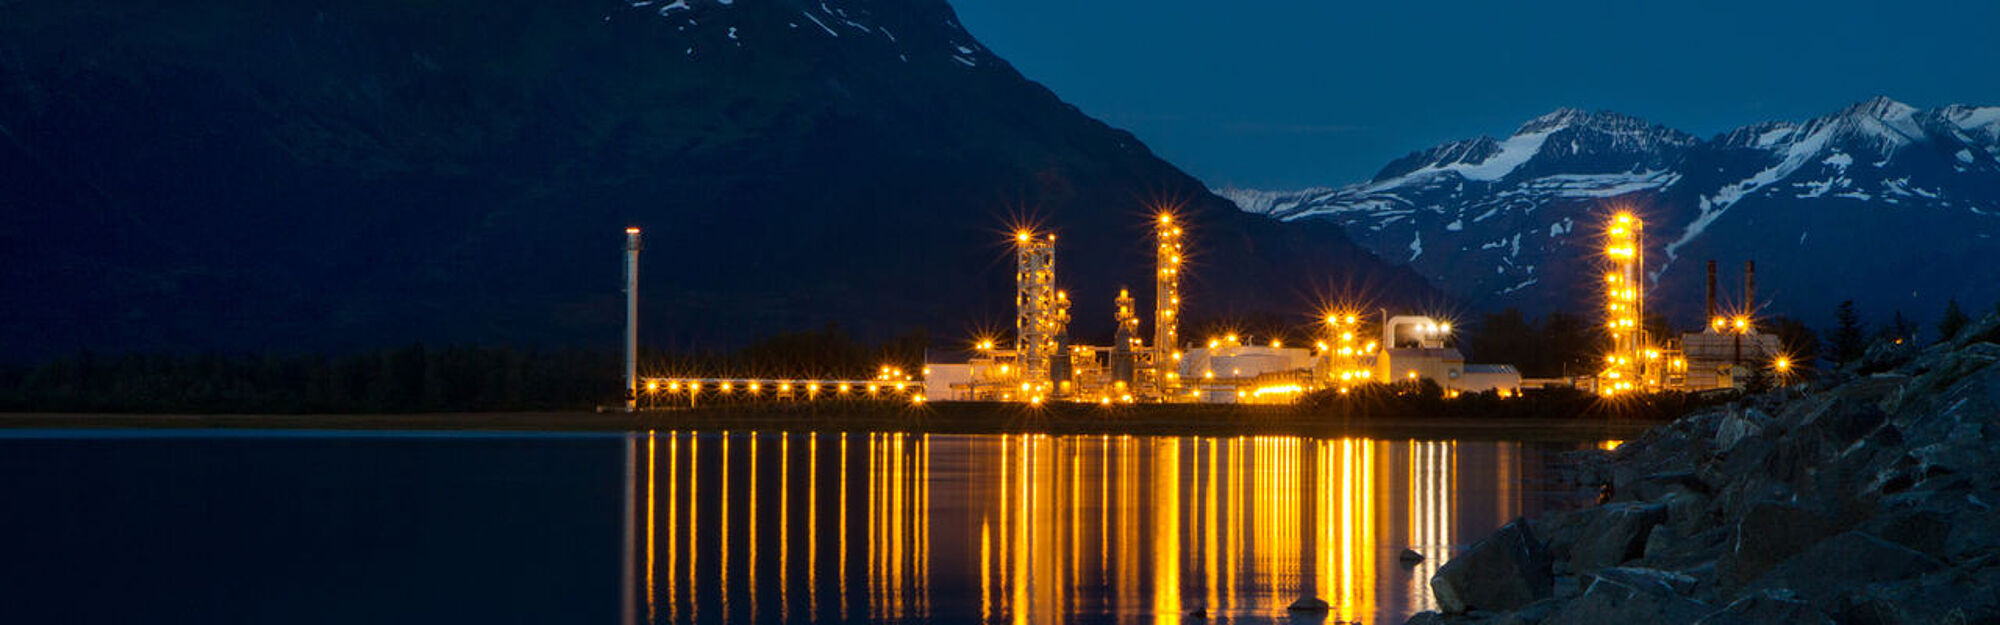 oil-gas-petrochemicals-image